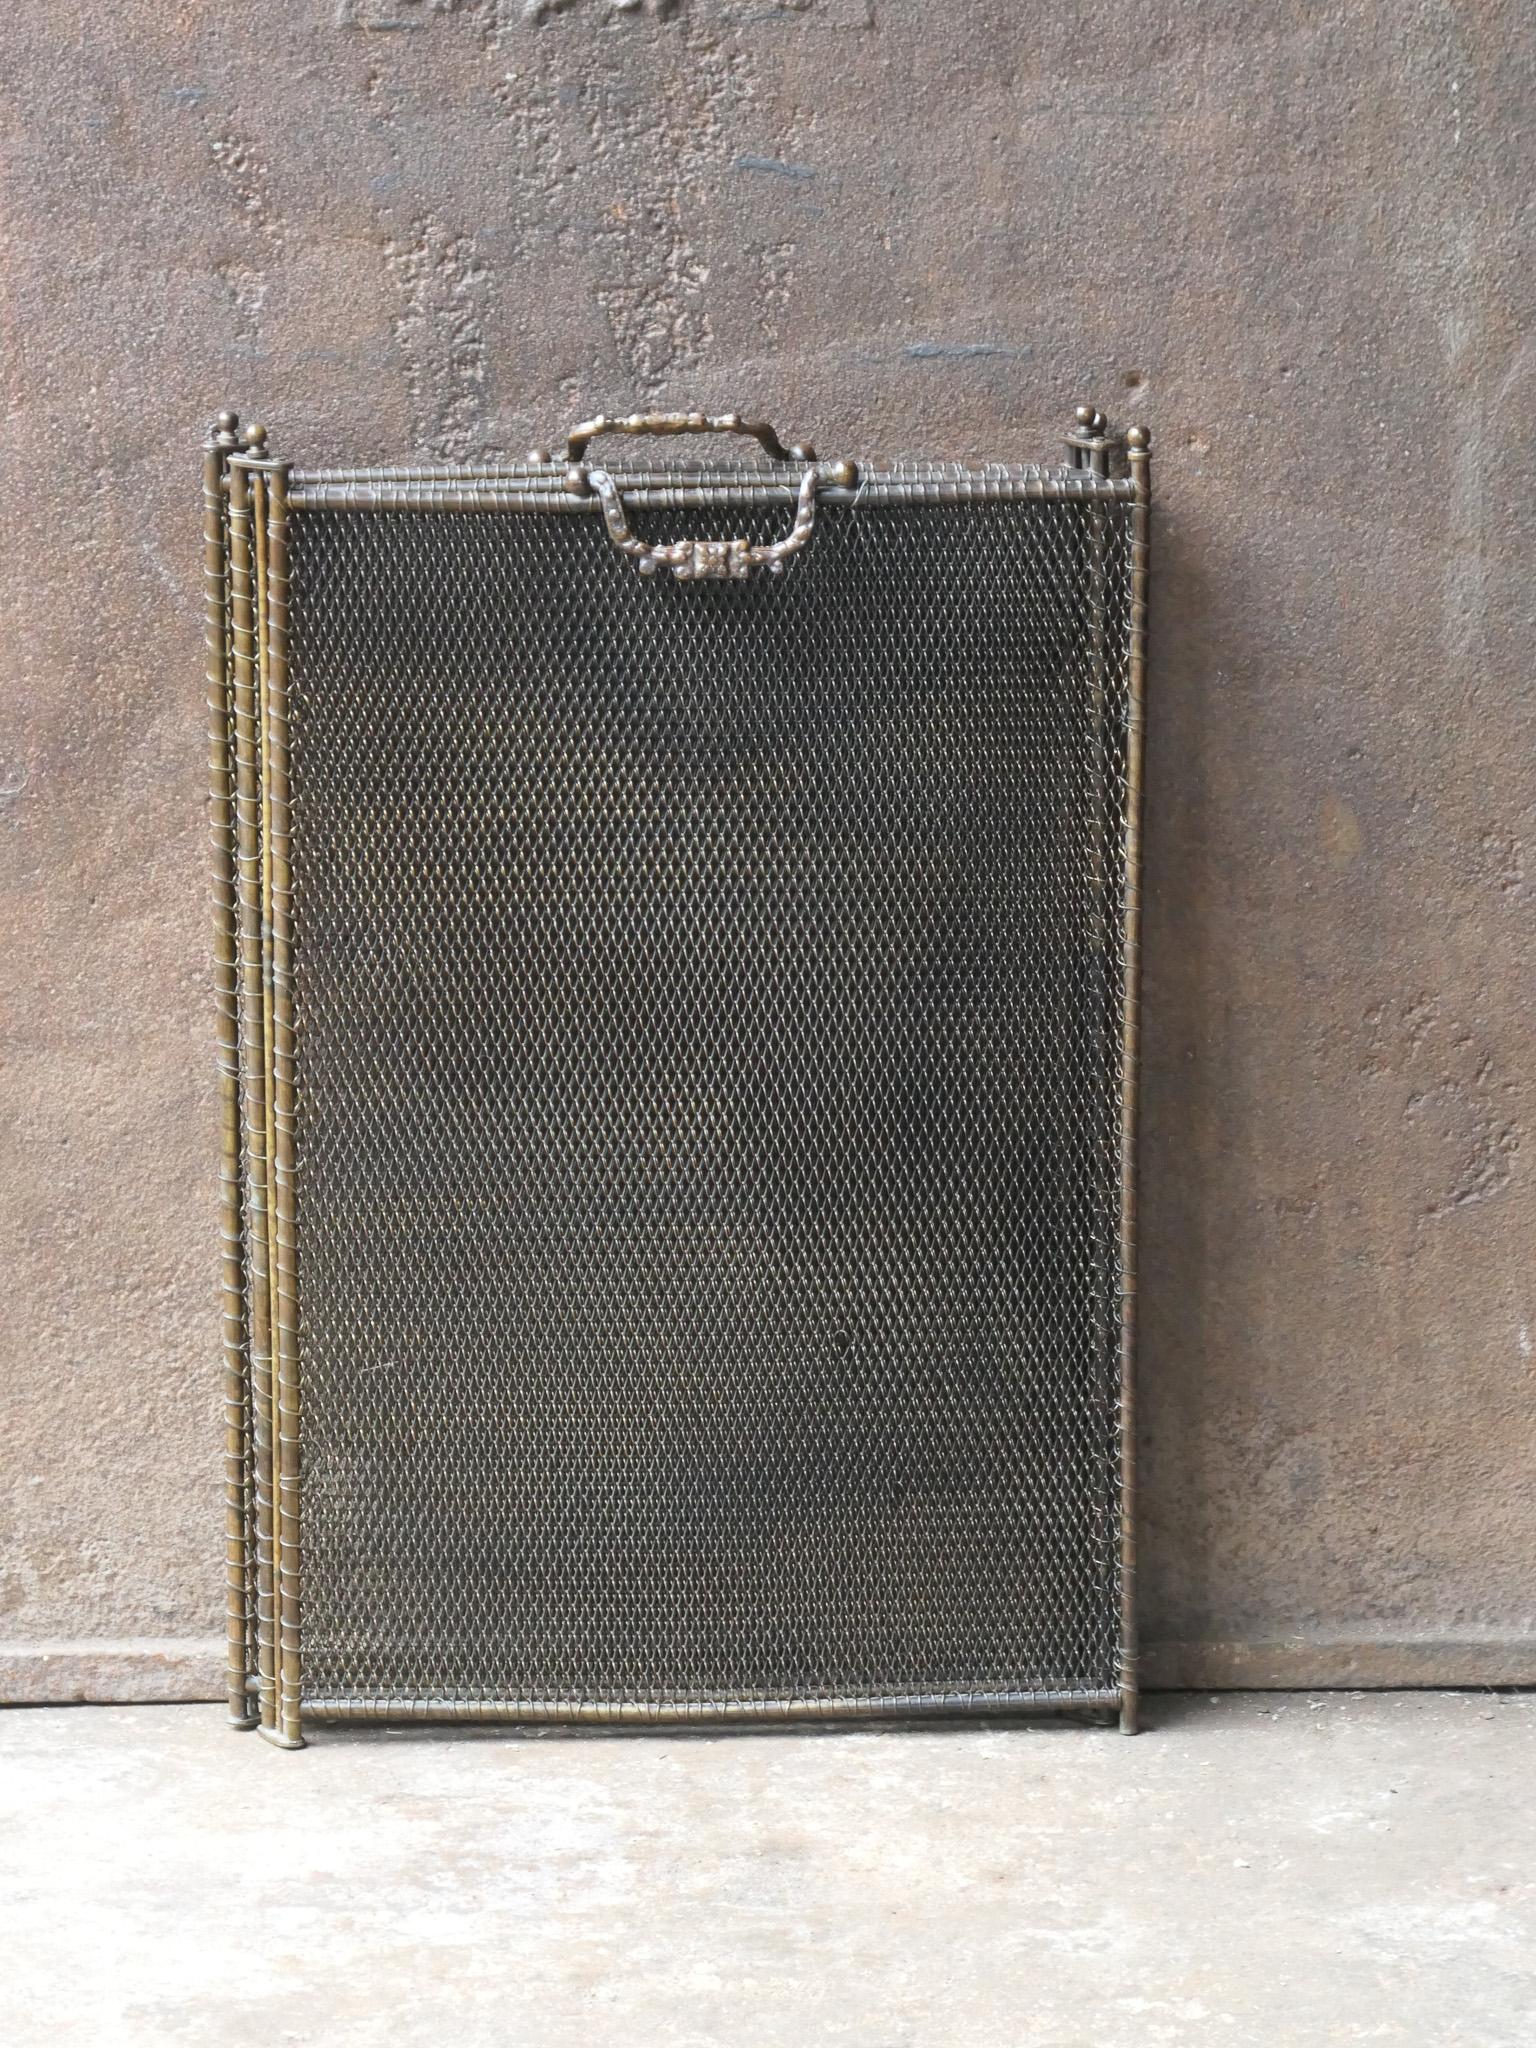 19th century French Napoleon III 4-panel fireplace screen. The screen is made of iron and iron mesh and has brownish color. It is in a good condition and is fit for use in front of the fireplace.